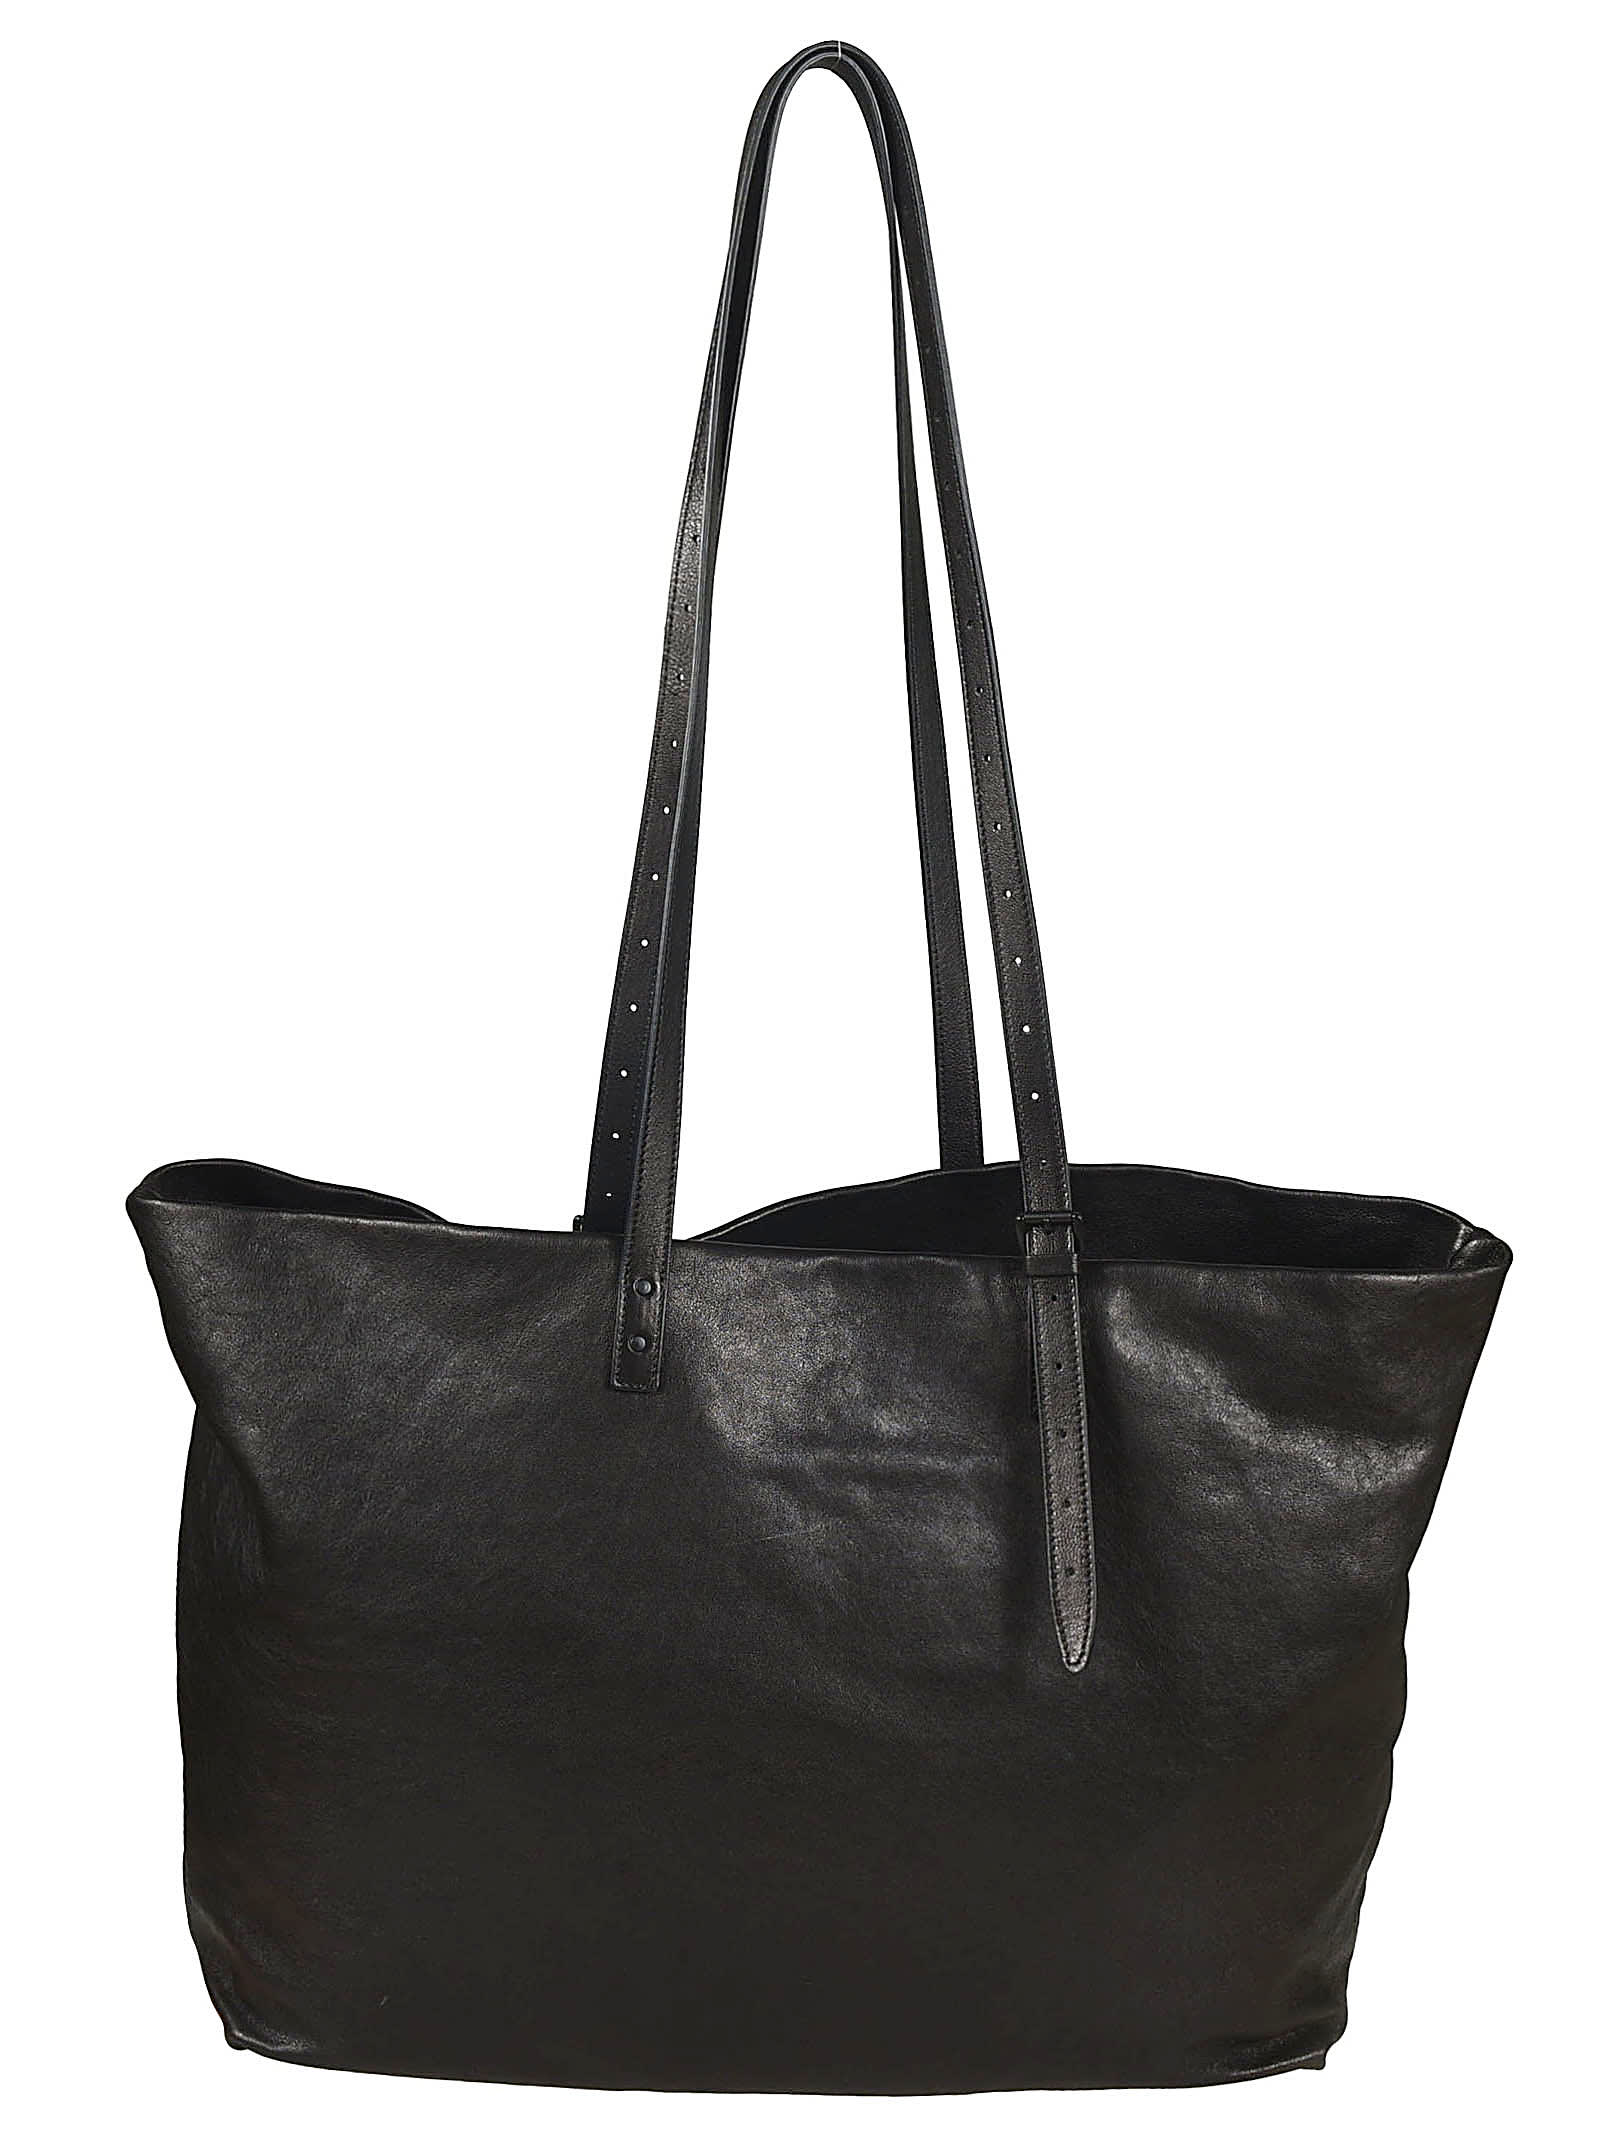 Ann Demeulemeester Bes Tote